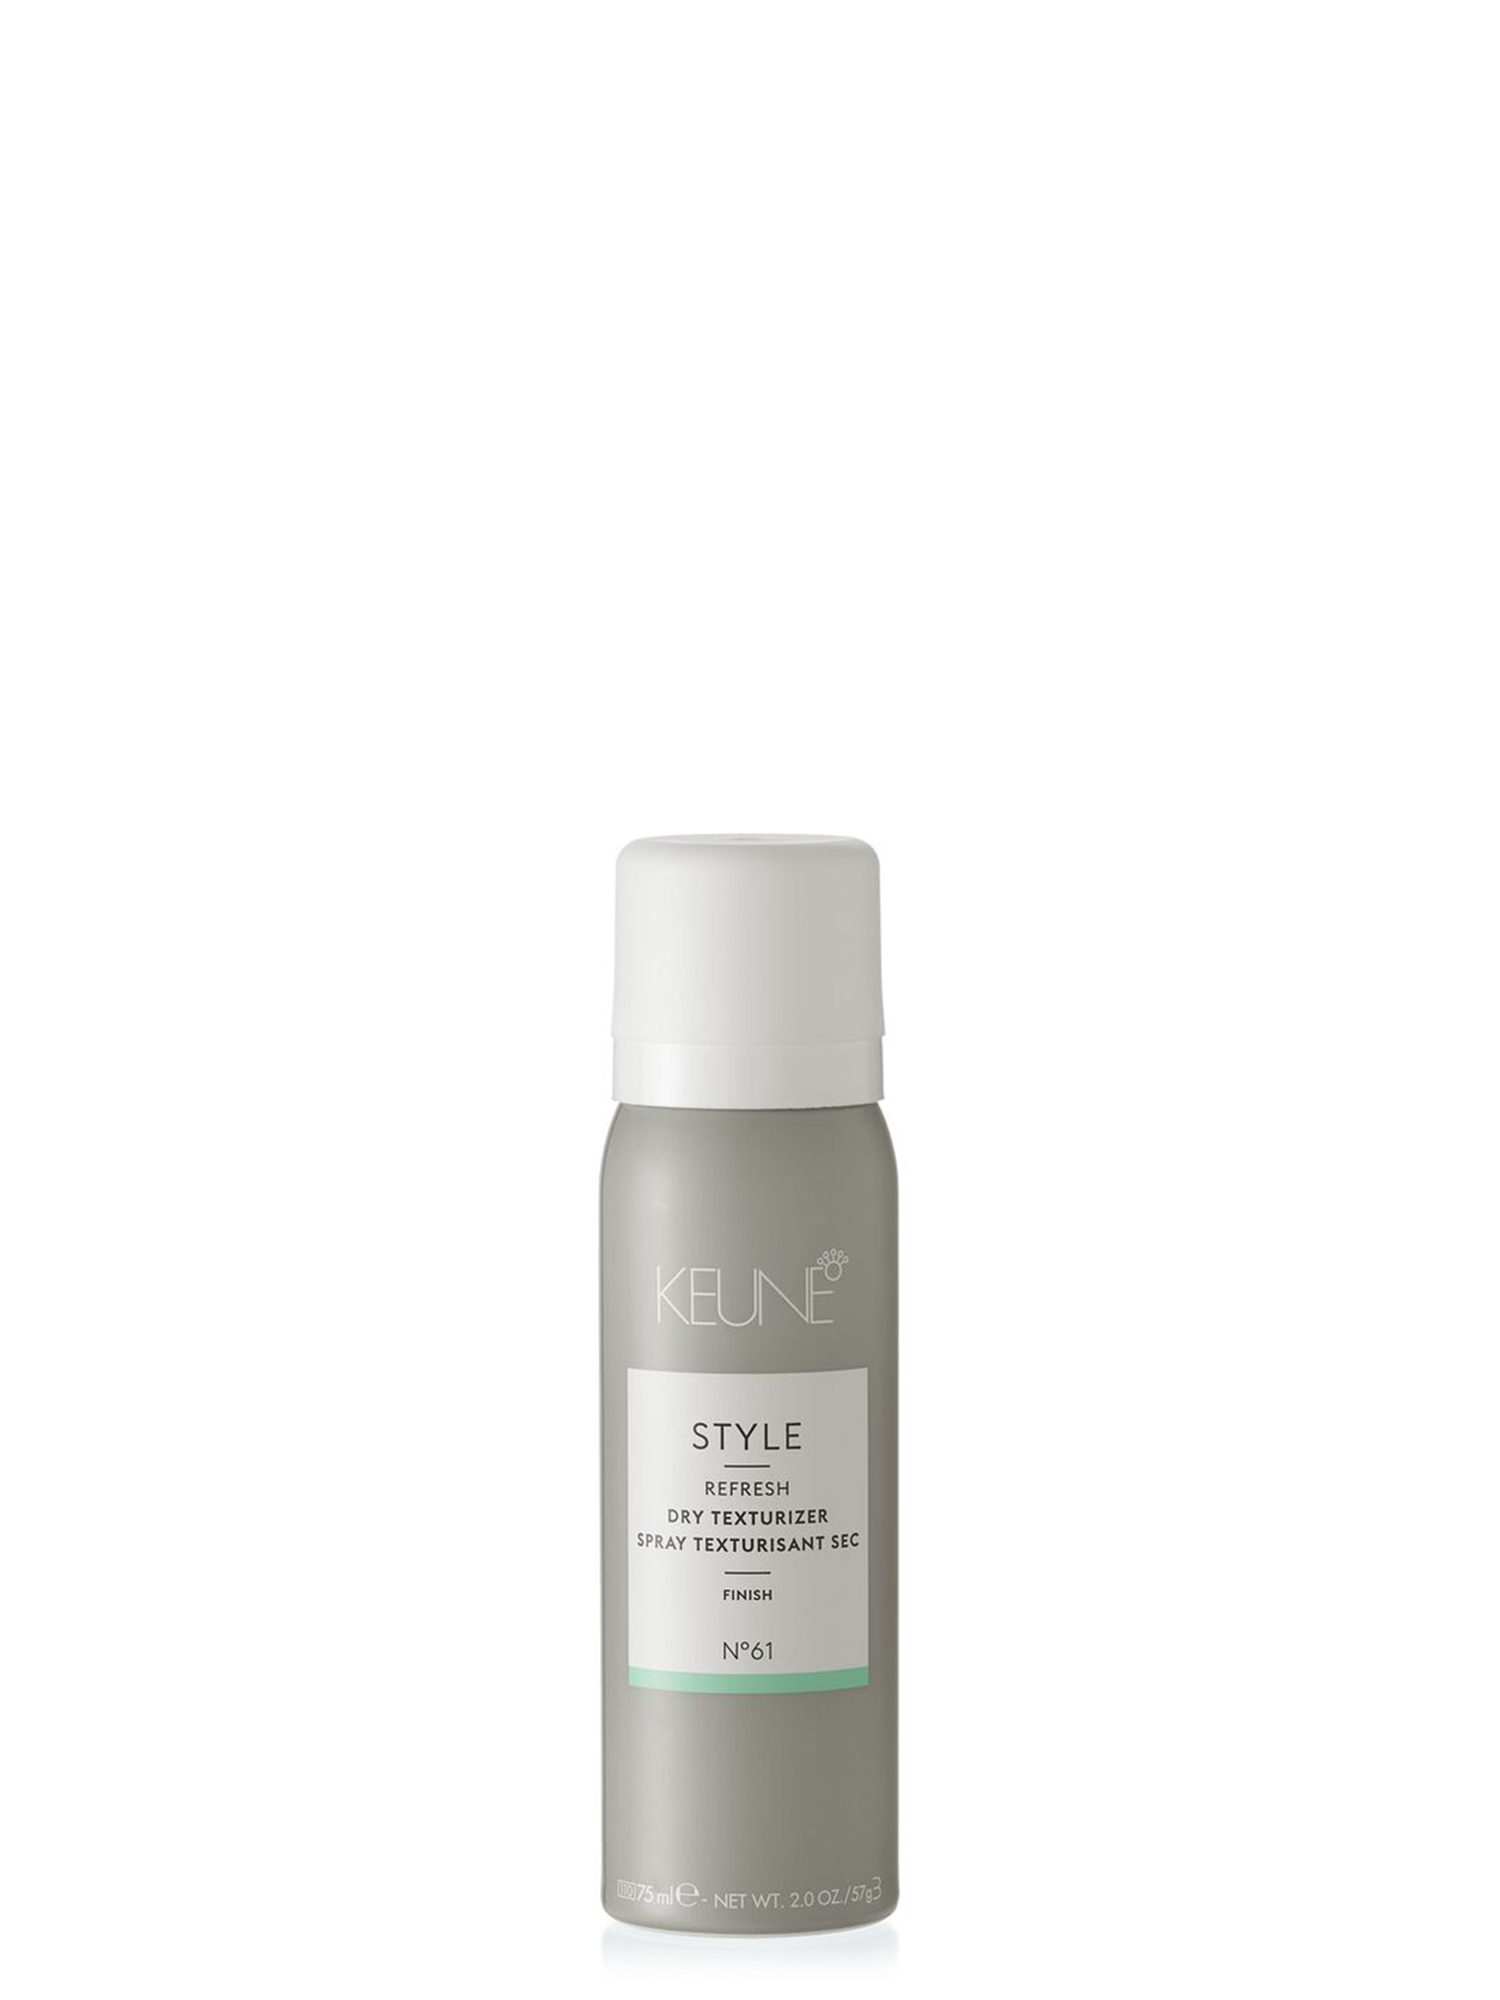 Style Dry Texturizer